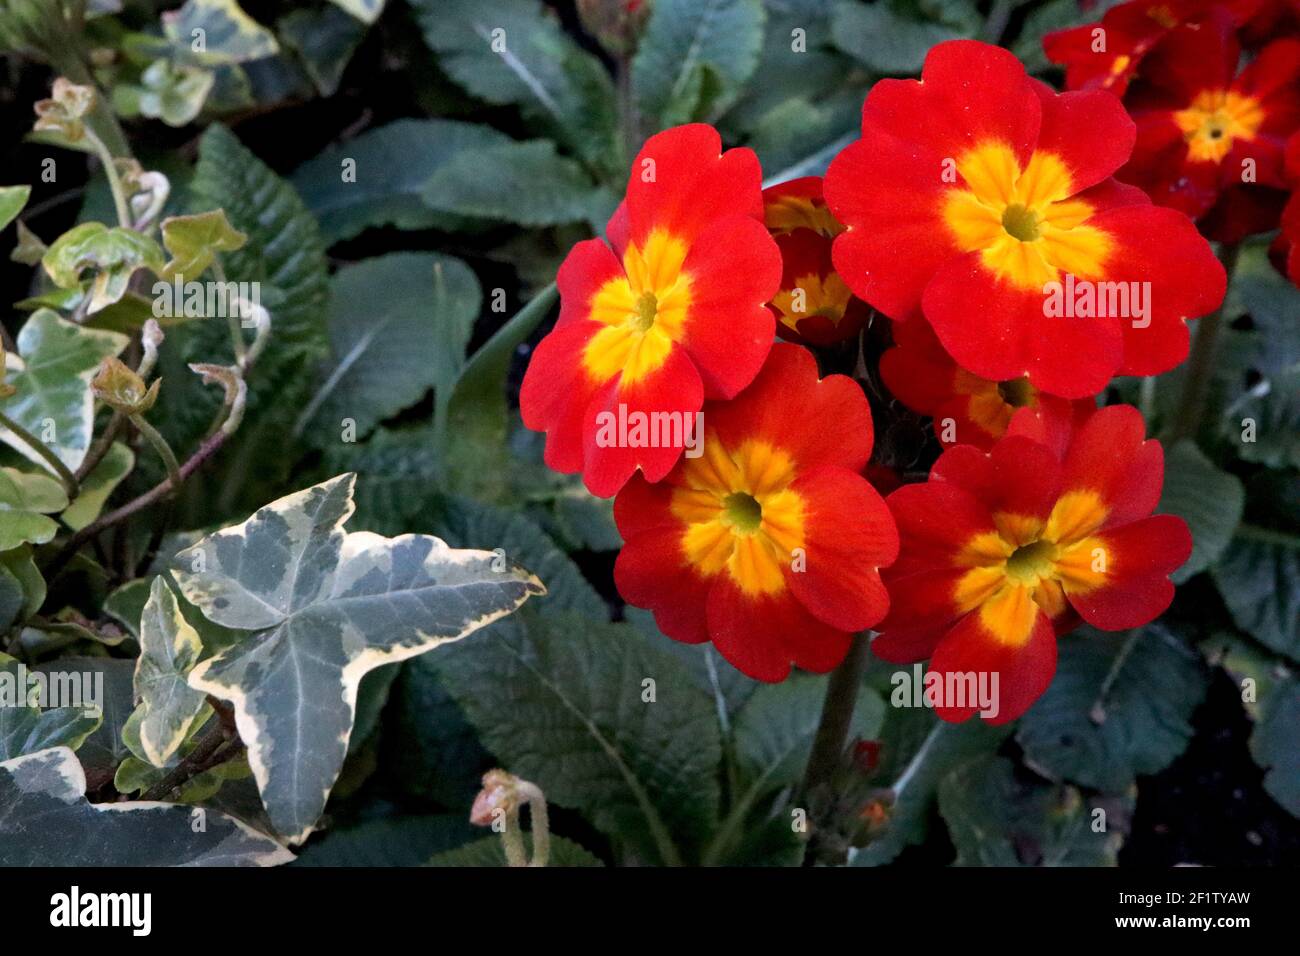 Primula polyanthus ‘Crescendo Bright Red’ red primroses with yellow centres,  March, England, UK Stock Photo